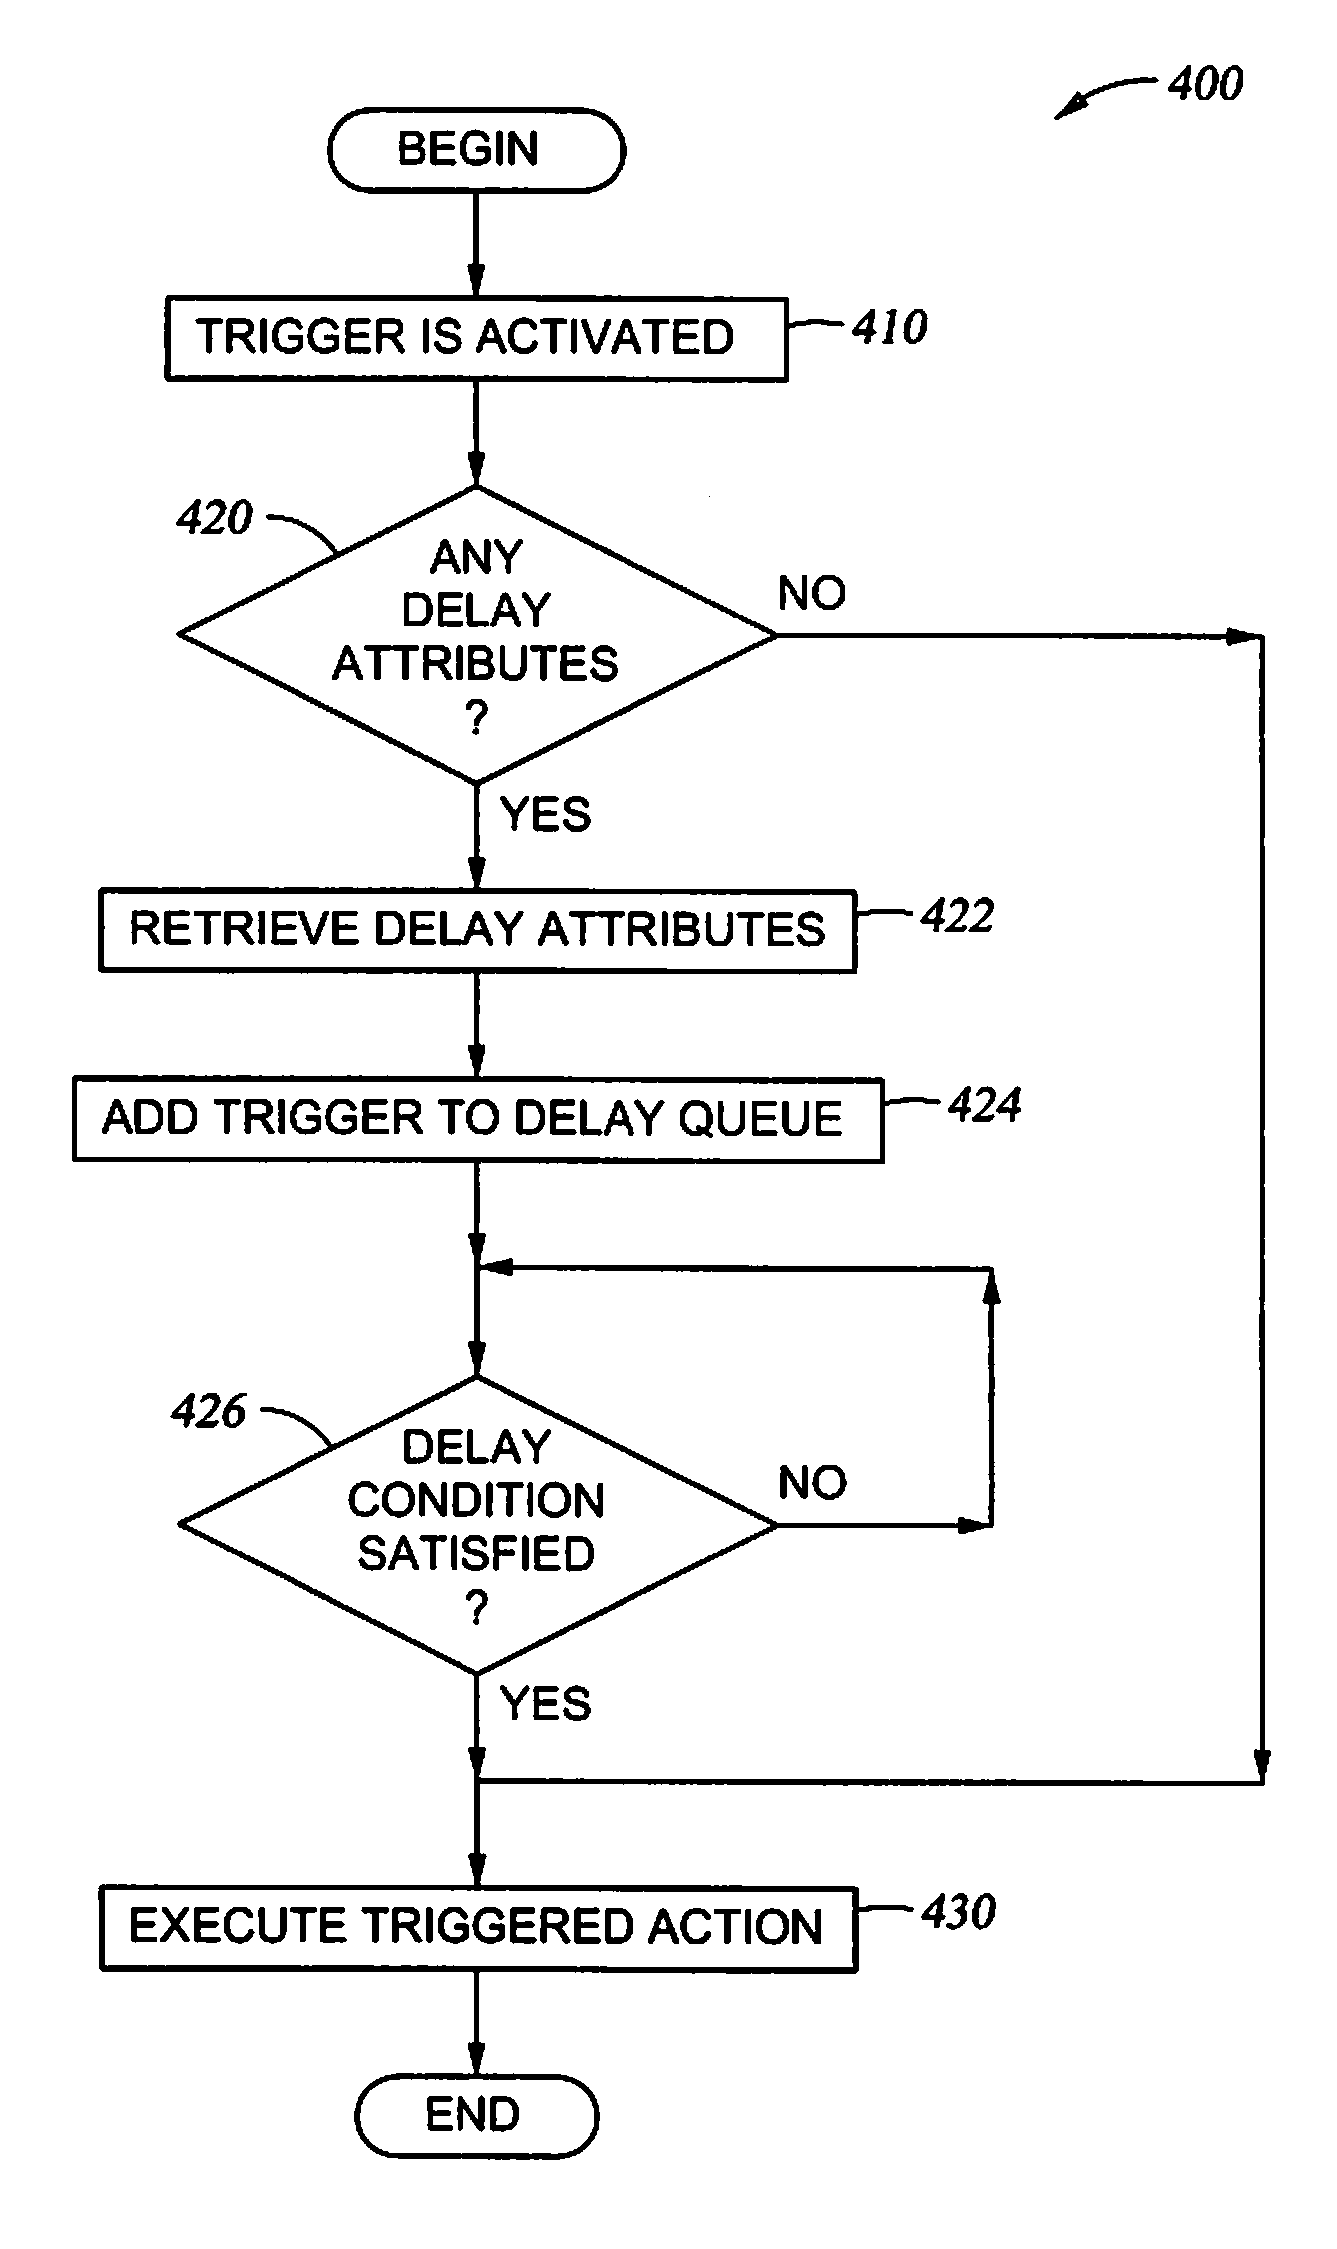 Affecting database file performance by allowing delayed query language trigger firing